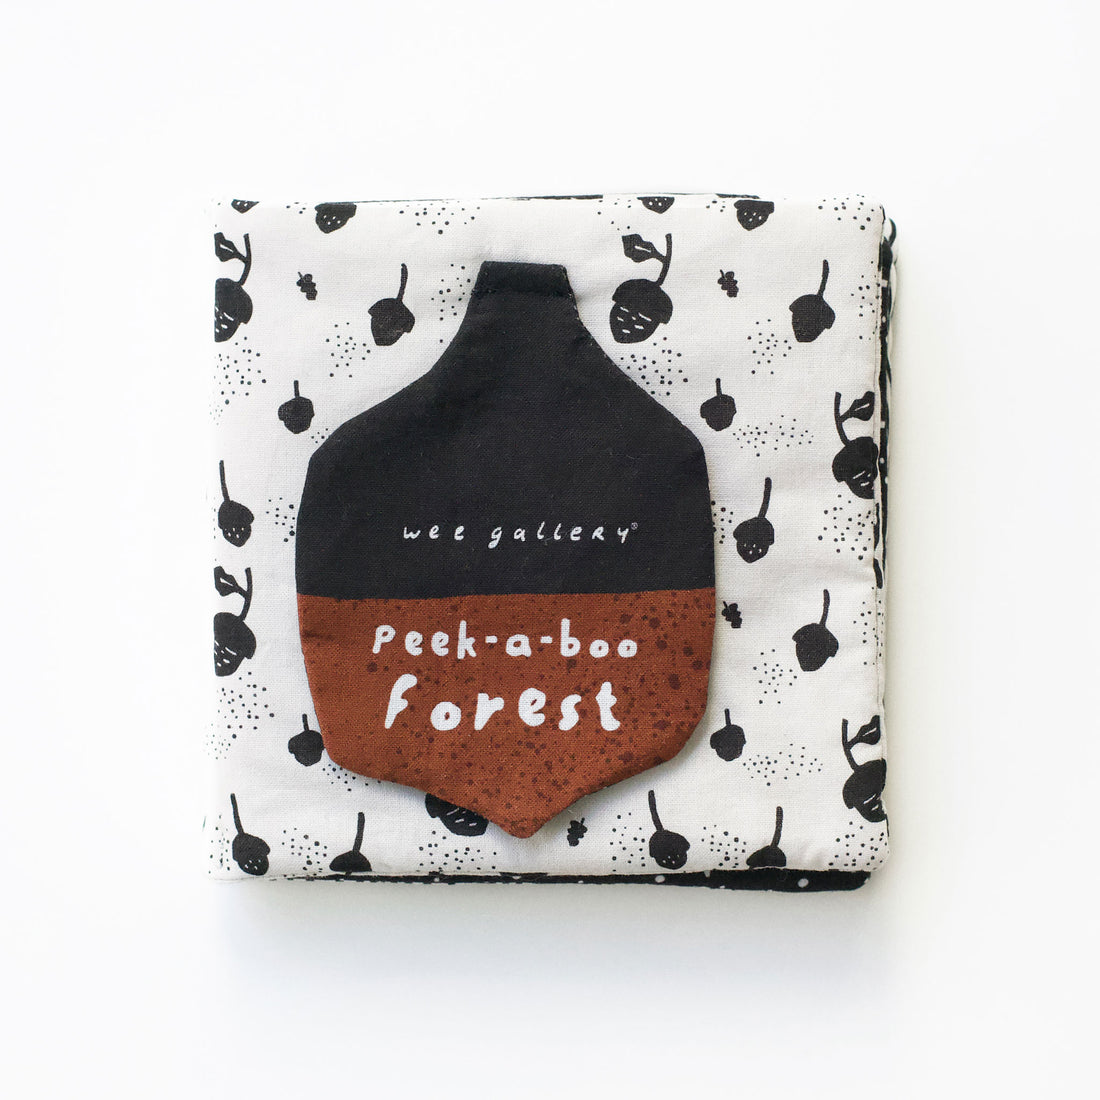 Wee Gallery: Peek-a-boo Forest Books Hachette   